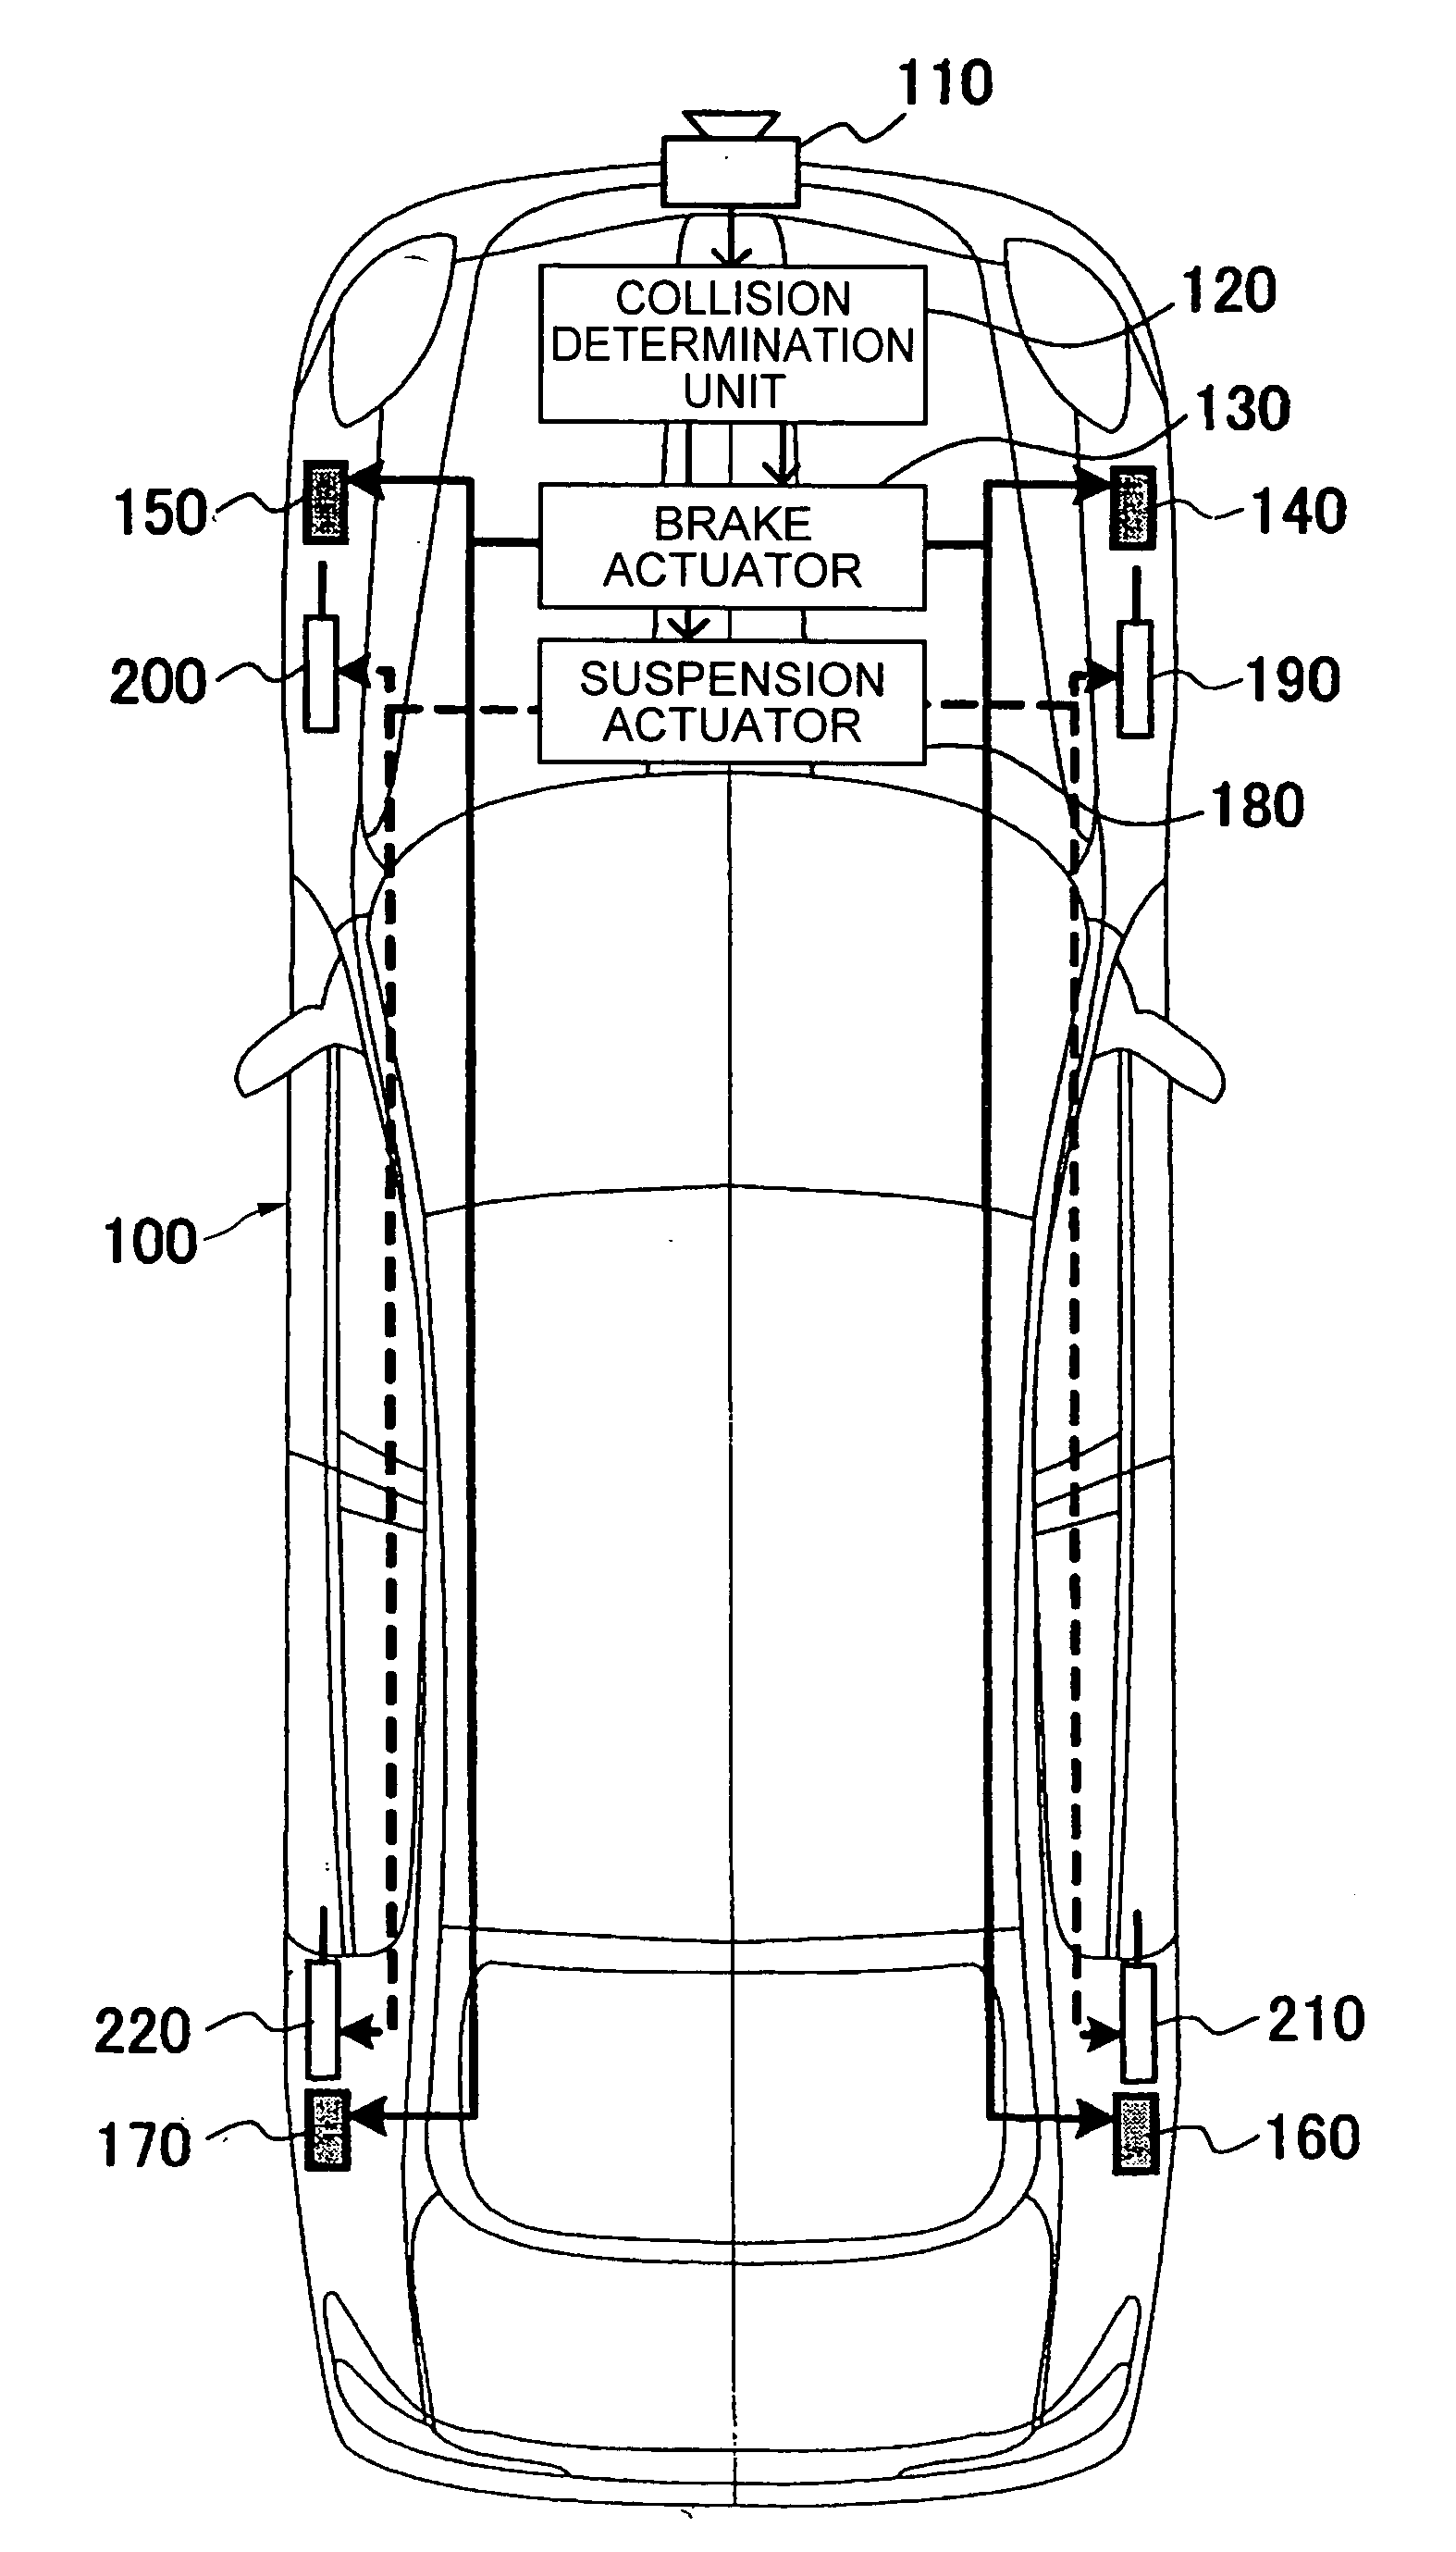 Vehicle safety control apparatus for avoiding collision